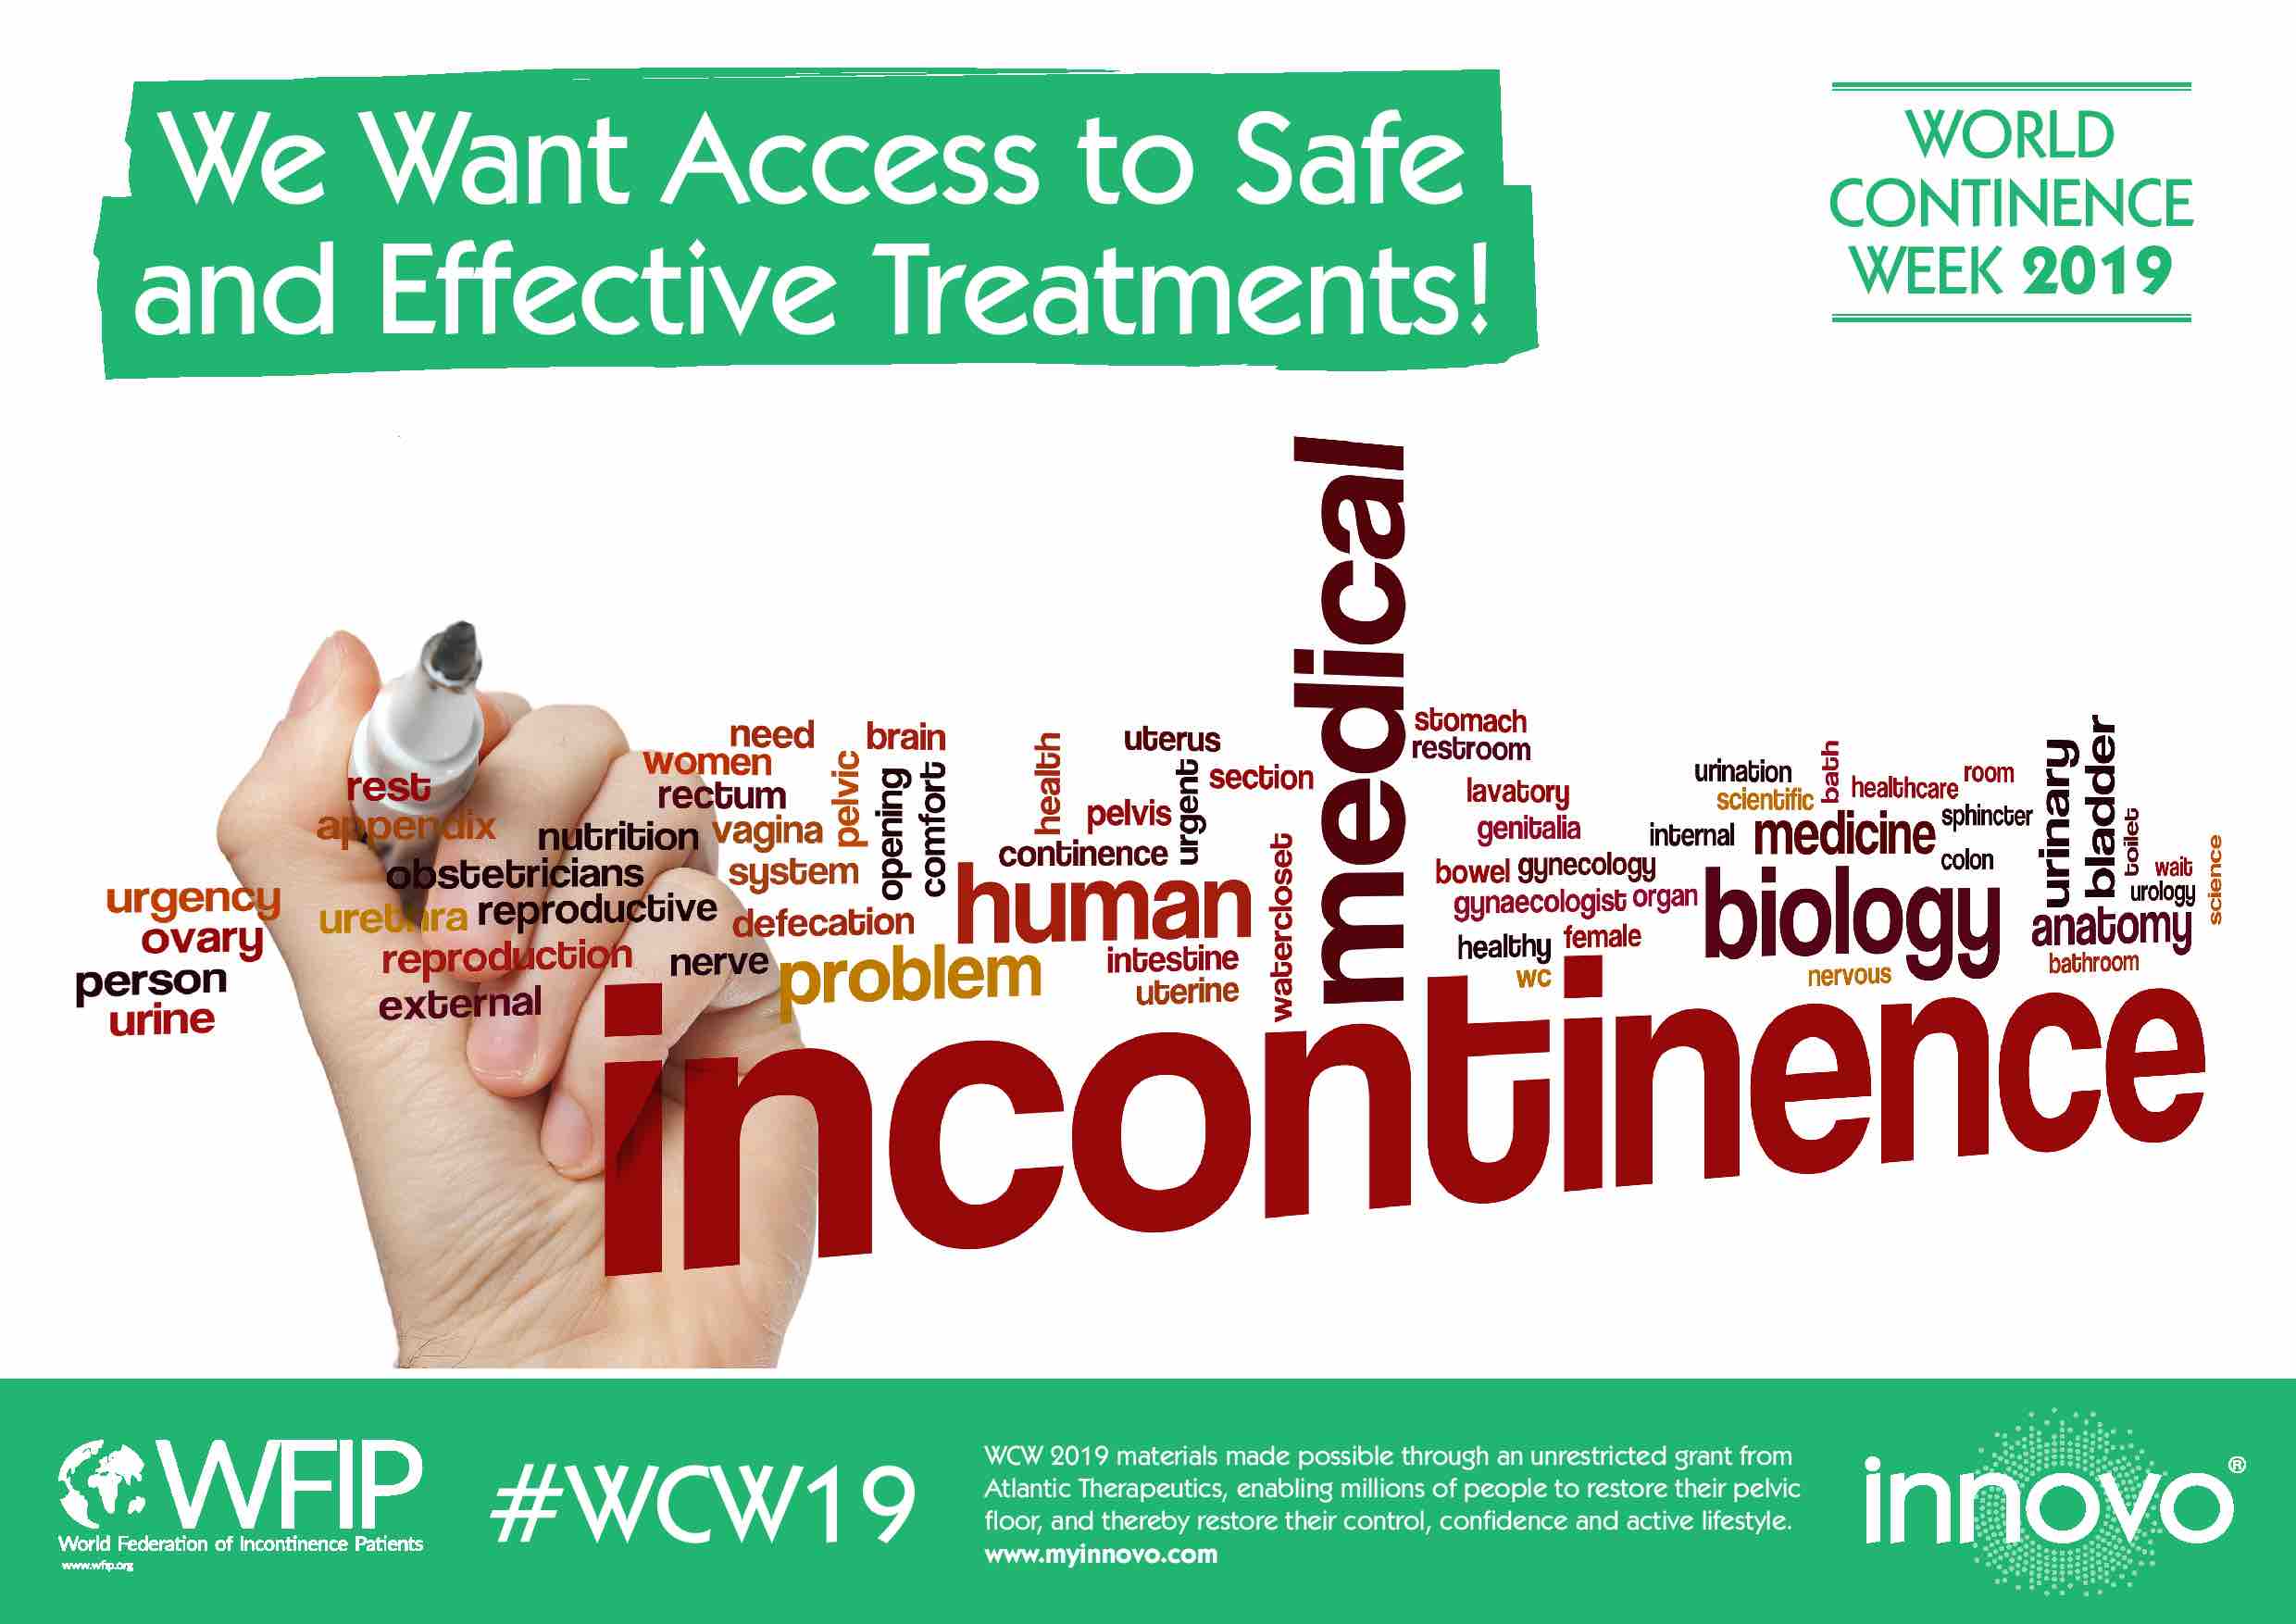 World continence week 2019 poster